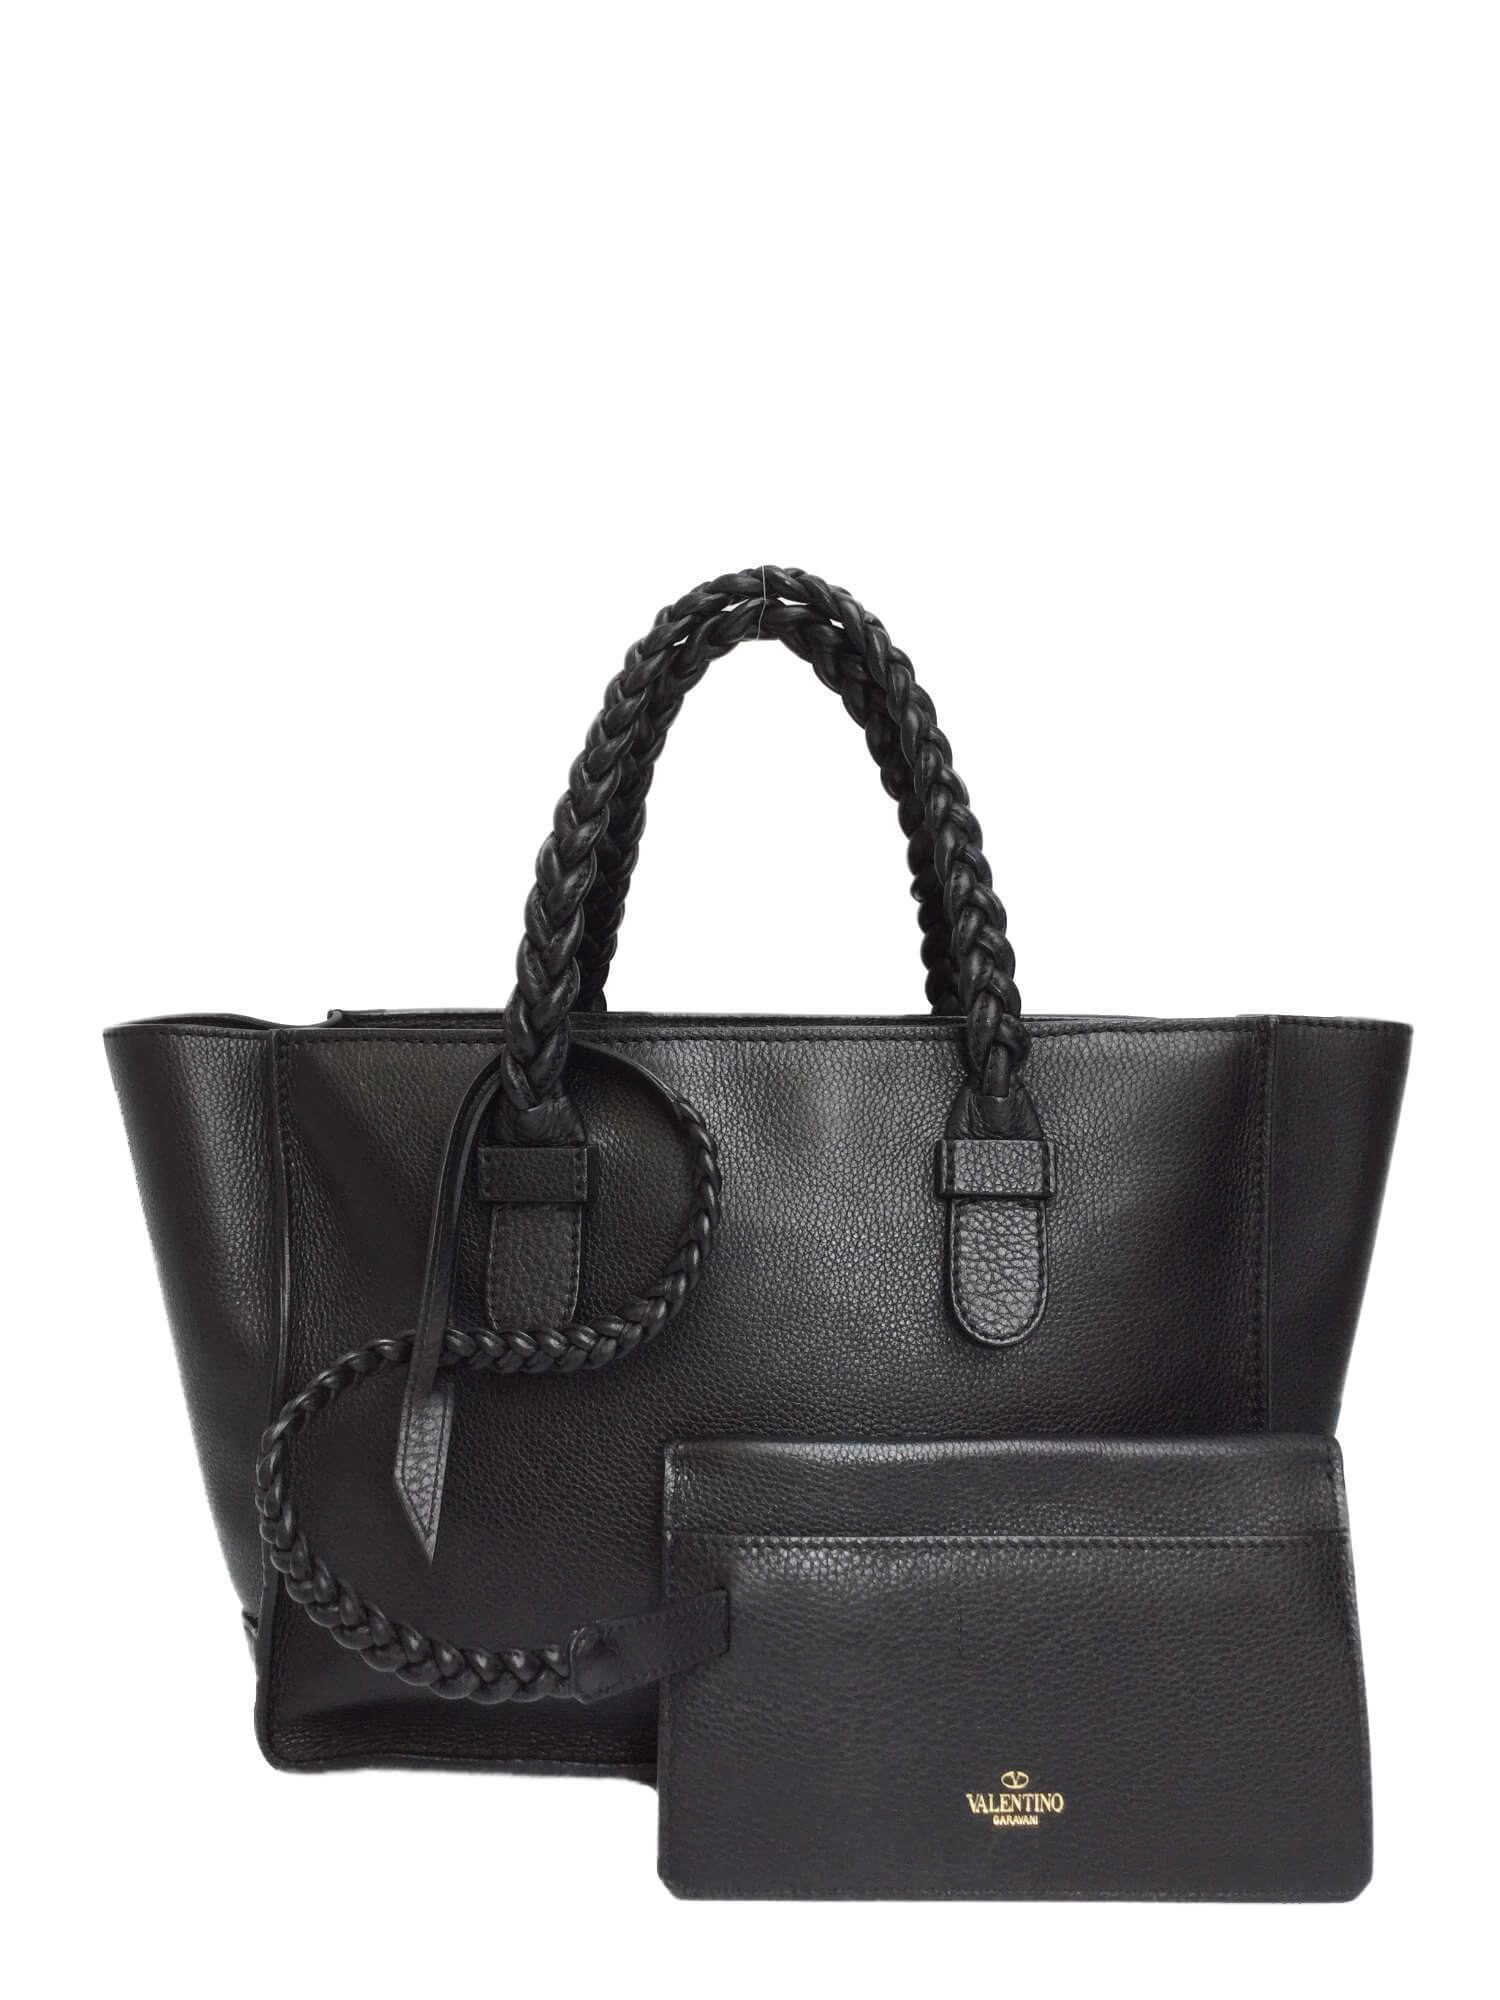 Black Leather Braided Handle Tote Bag with Pouch-designer resale